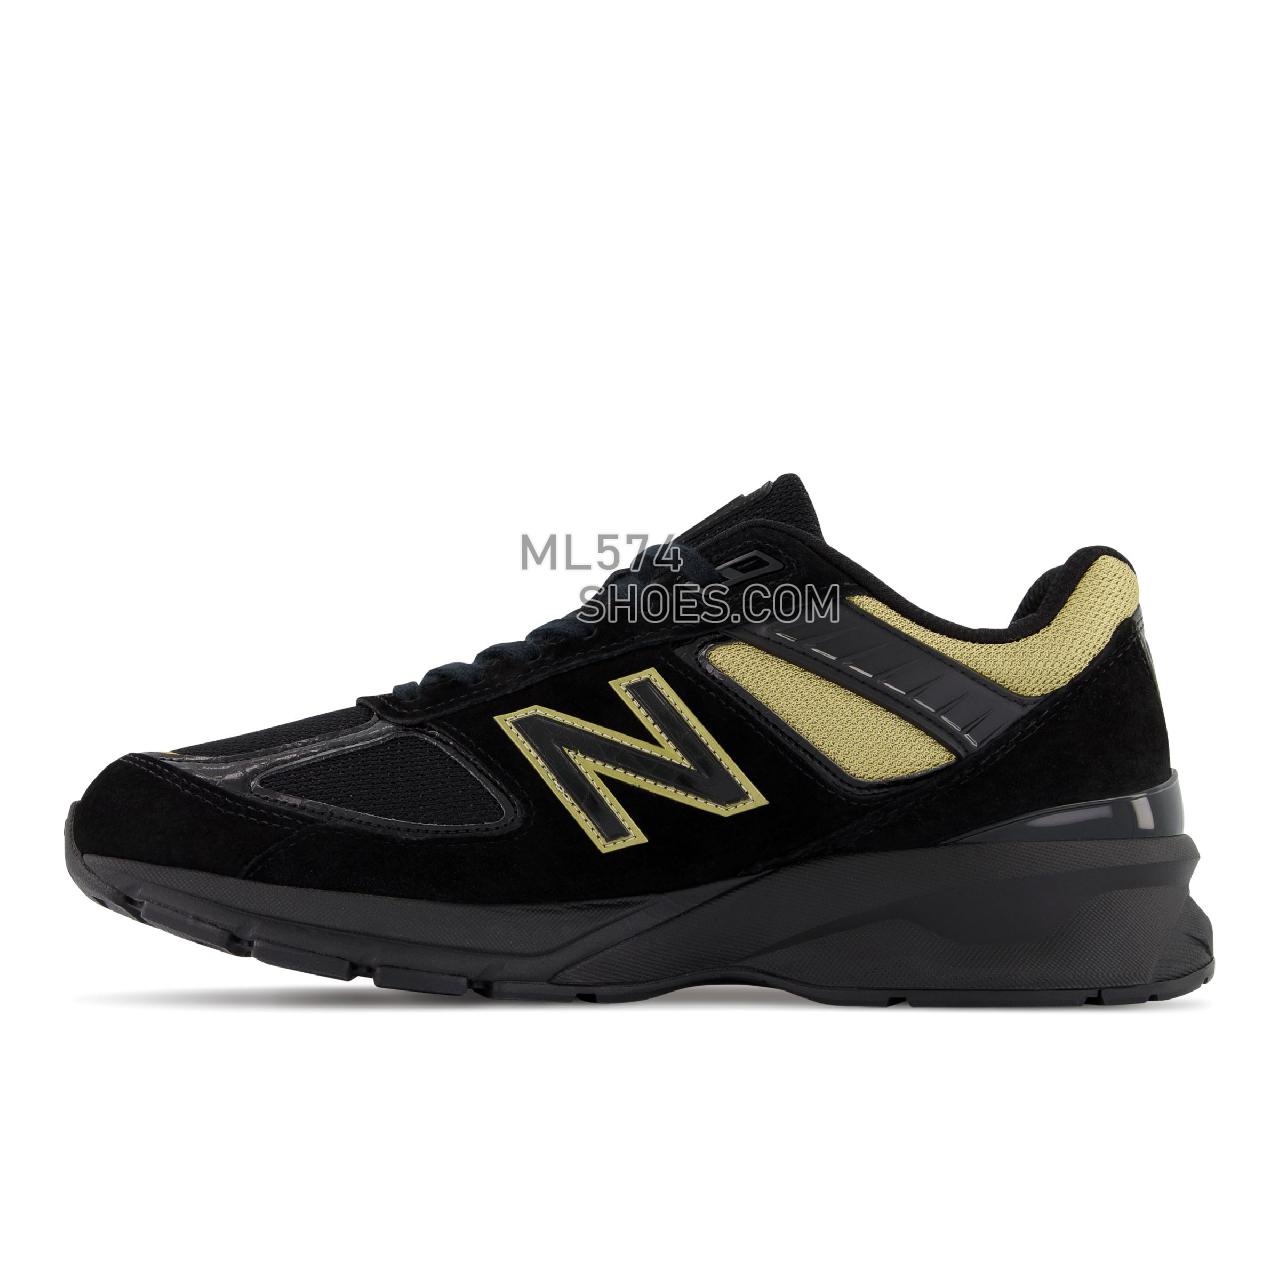 New Balance Made in USA 990v5 - Men's Neutral Running - Black with Gold - M990BH5